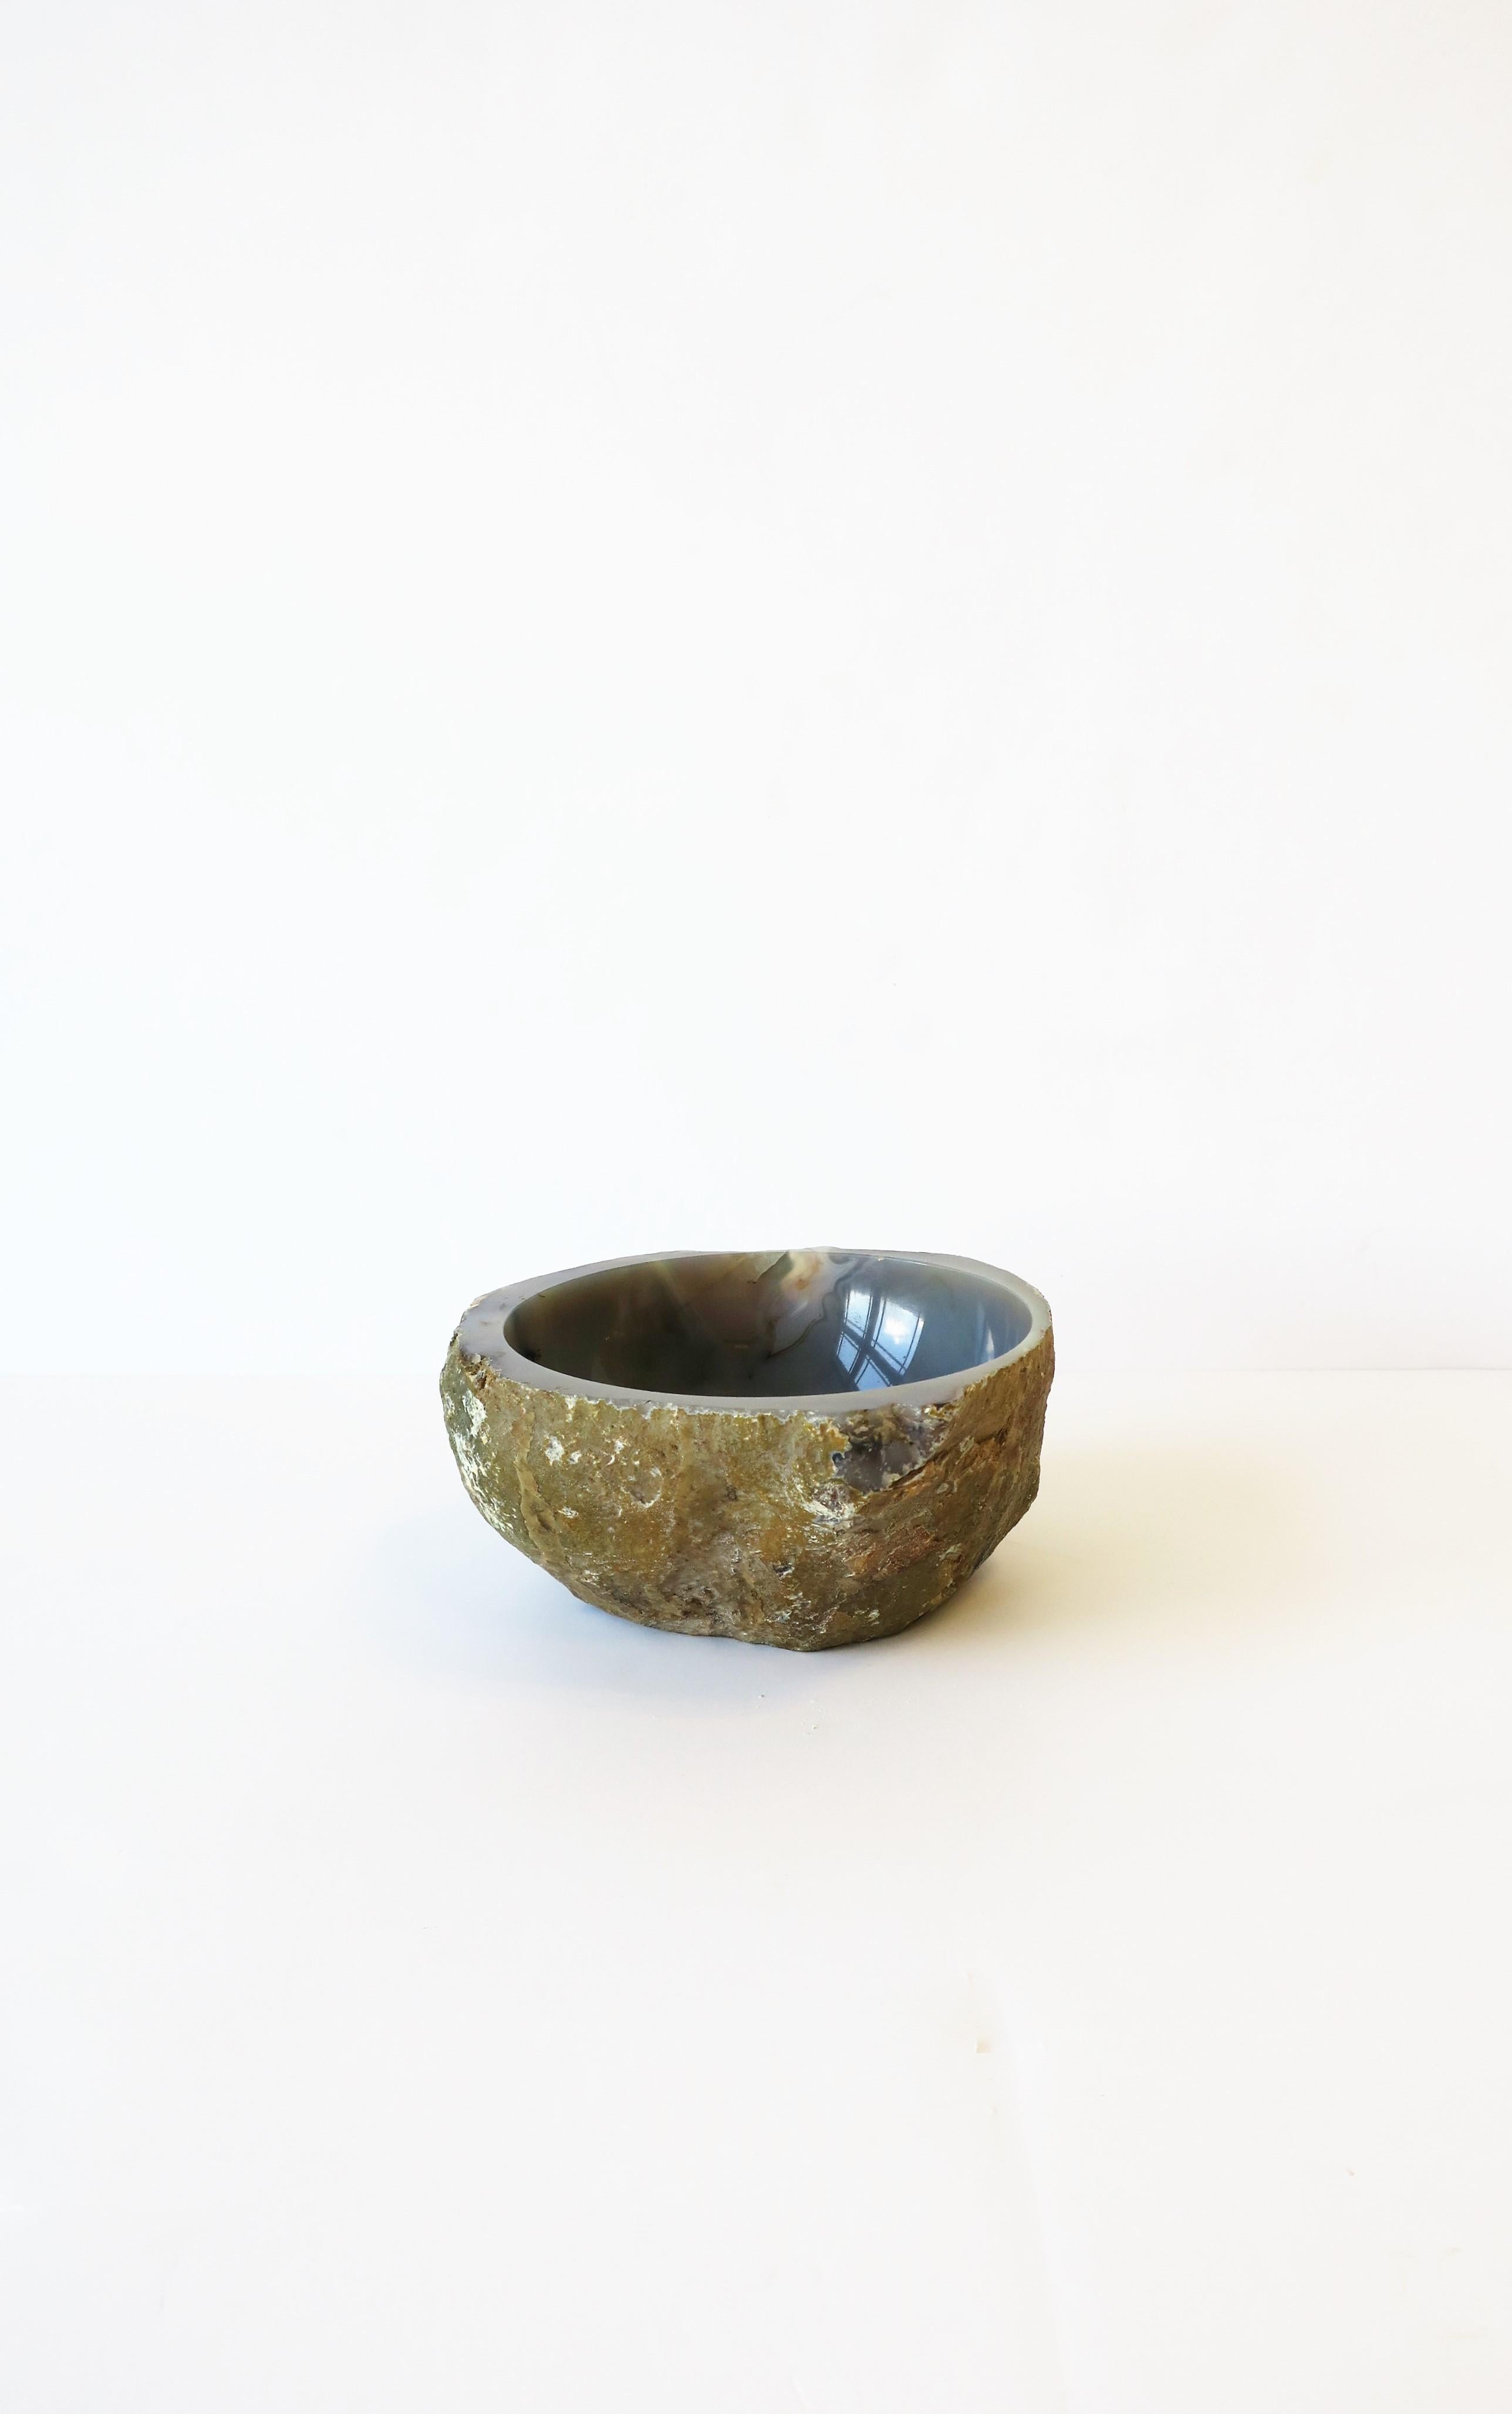 An onyx agate bowl in the organic modern style, with a raw exterior and polished smooth interior, in a blue-grey hue. 

Dimensions: 3